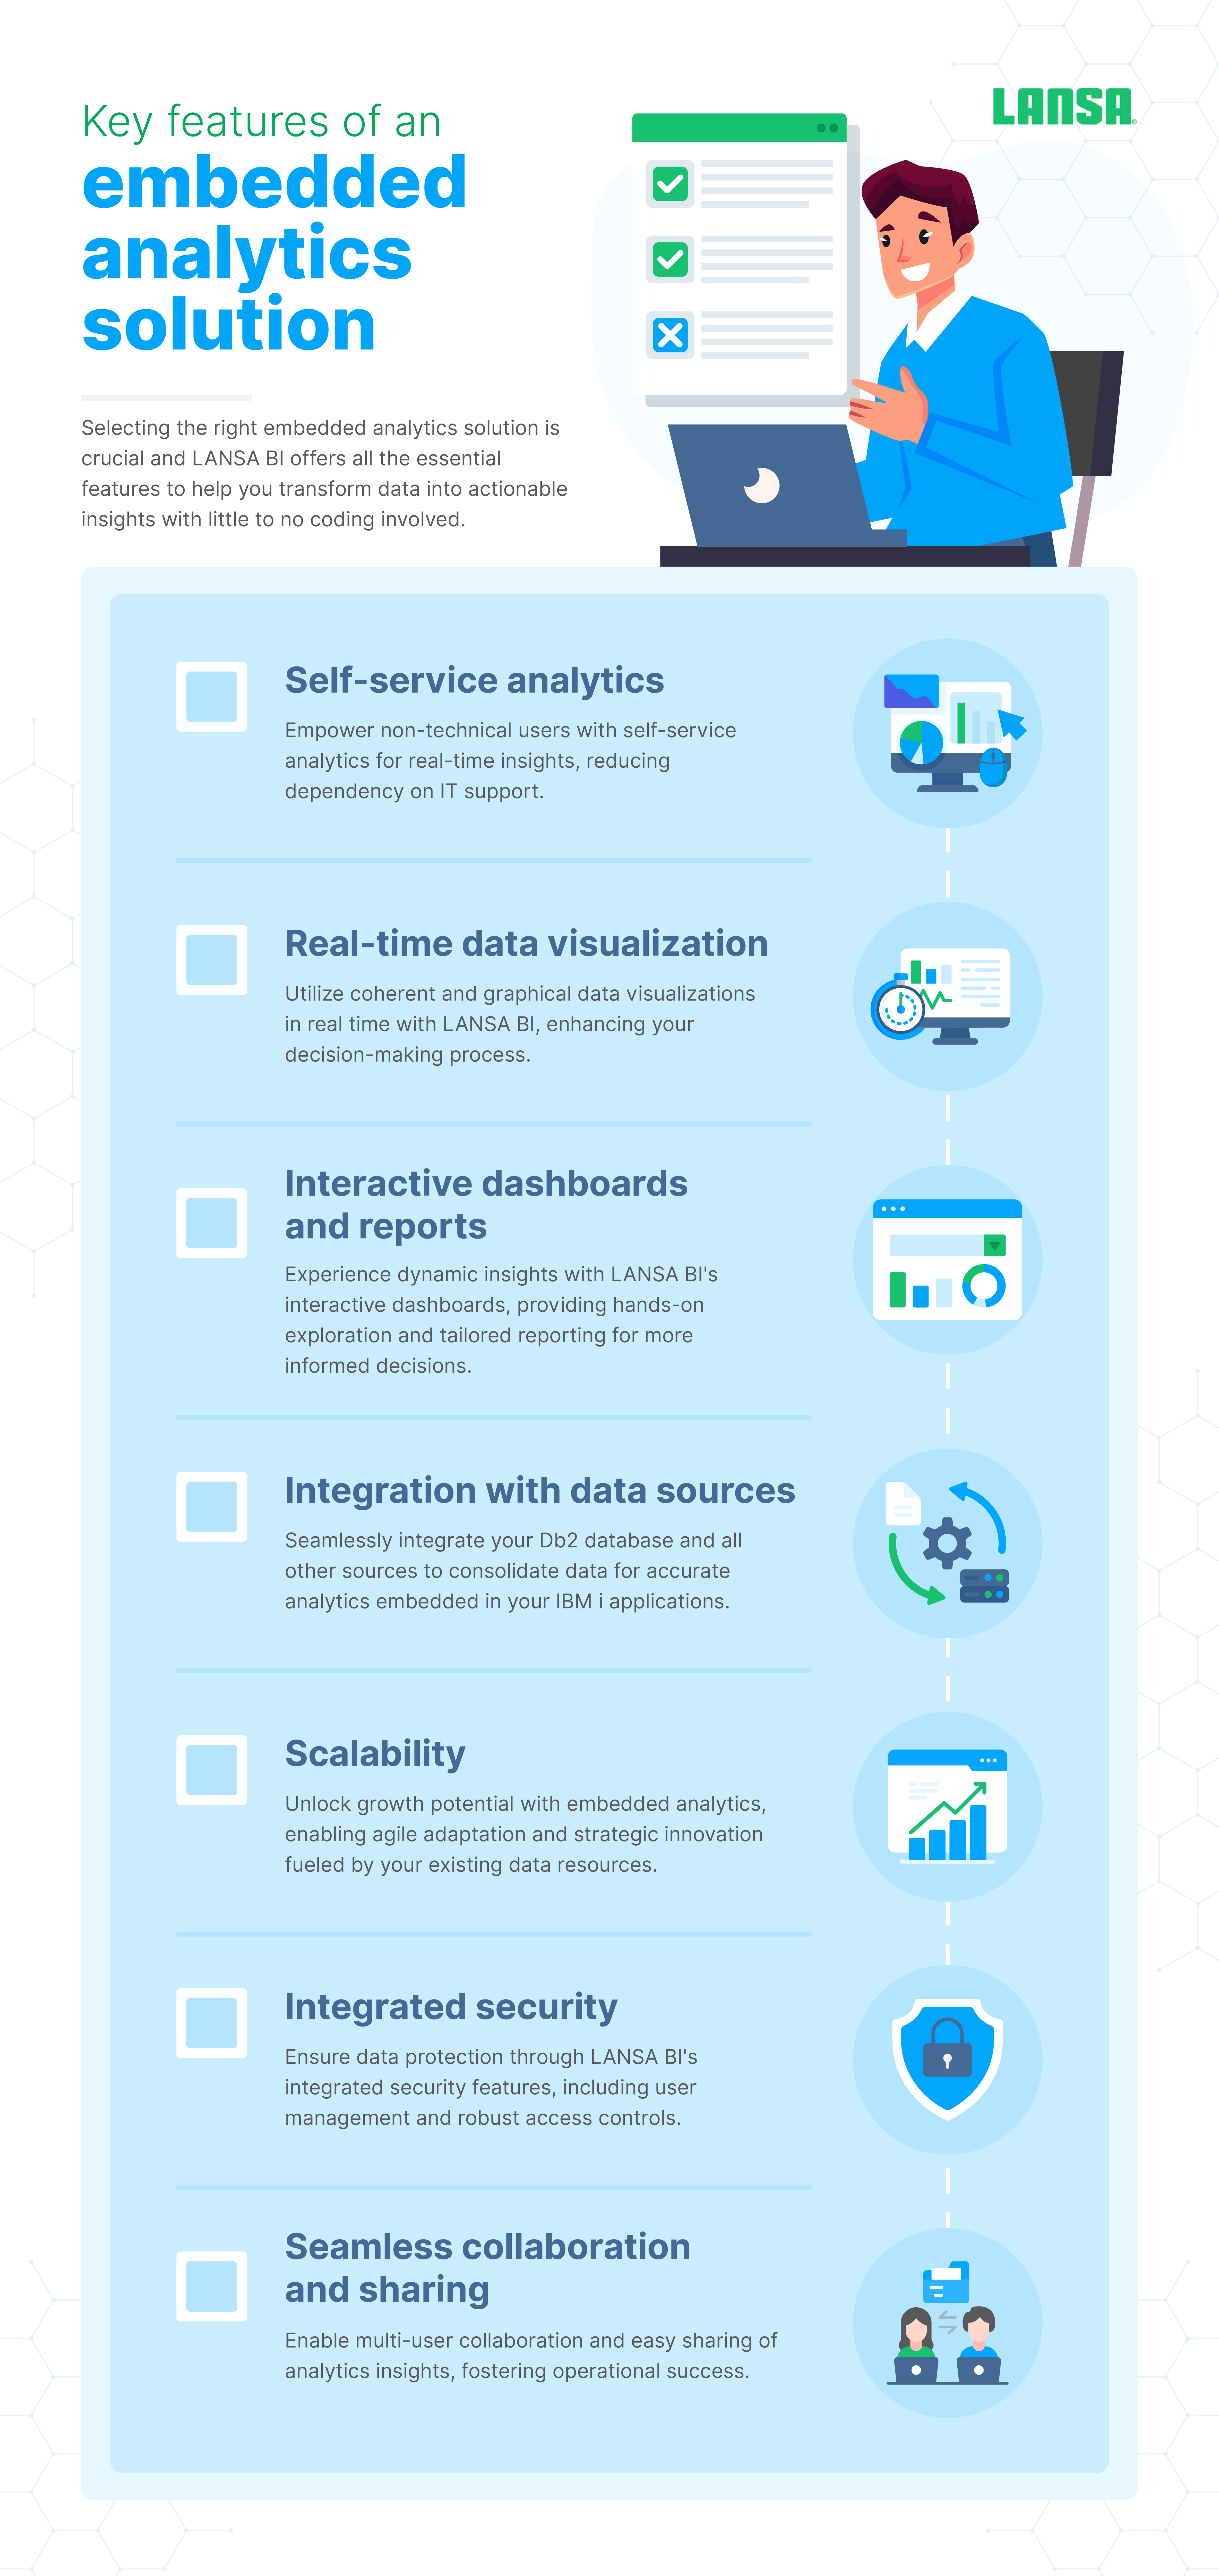 Key features of an embedded analytics platform